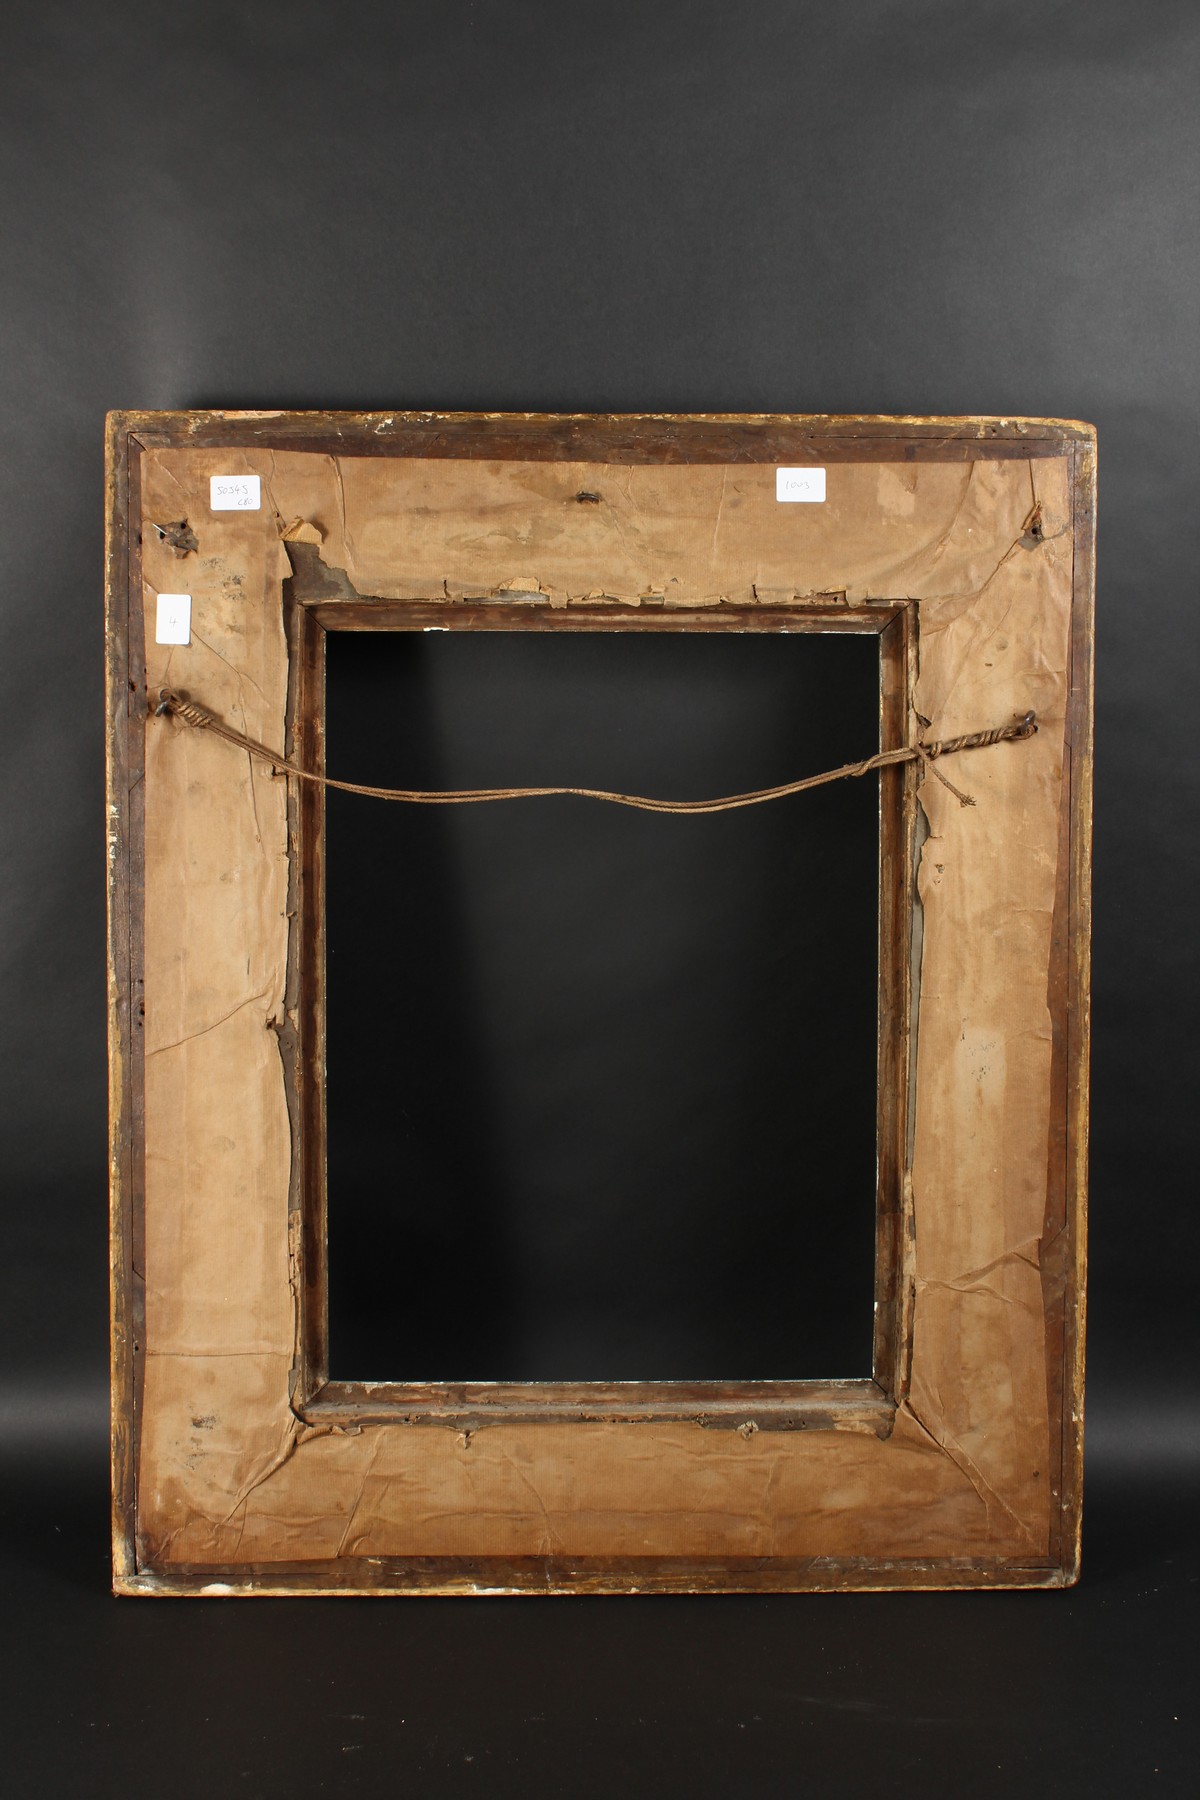 19th Century French Gilt Composition Frame. 20.75" x 15.5" - 52.75cm x 39.5cm. (Rebate Size) - Image 3 of 3